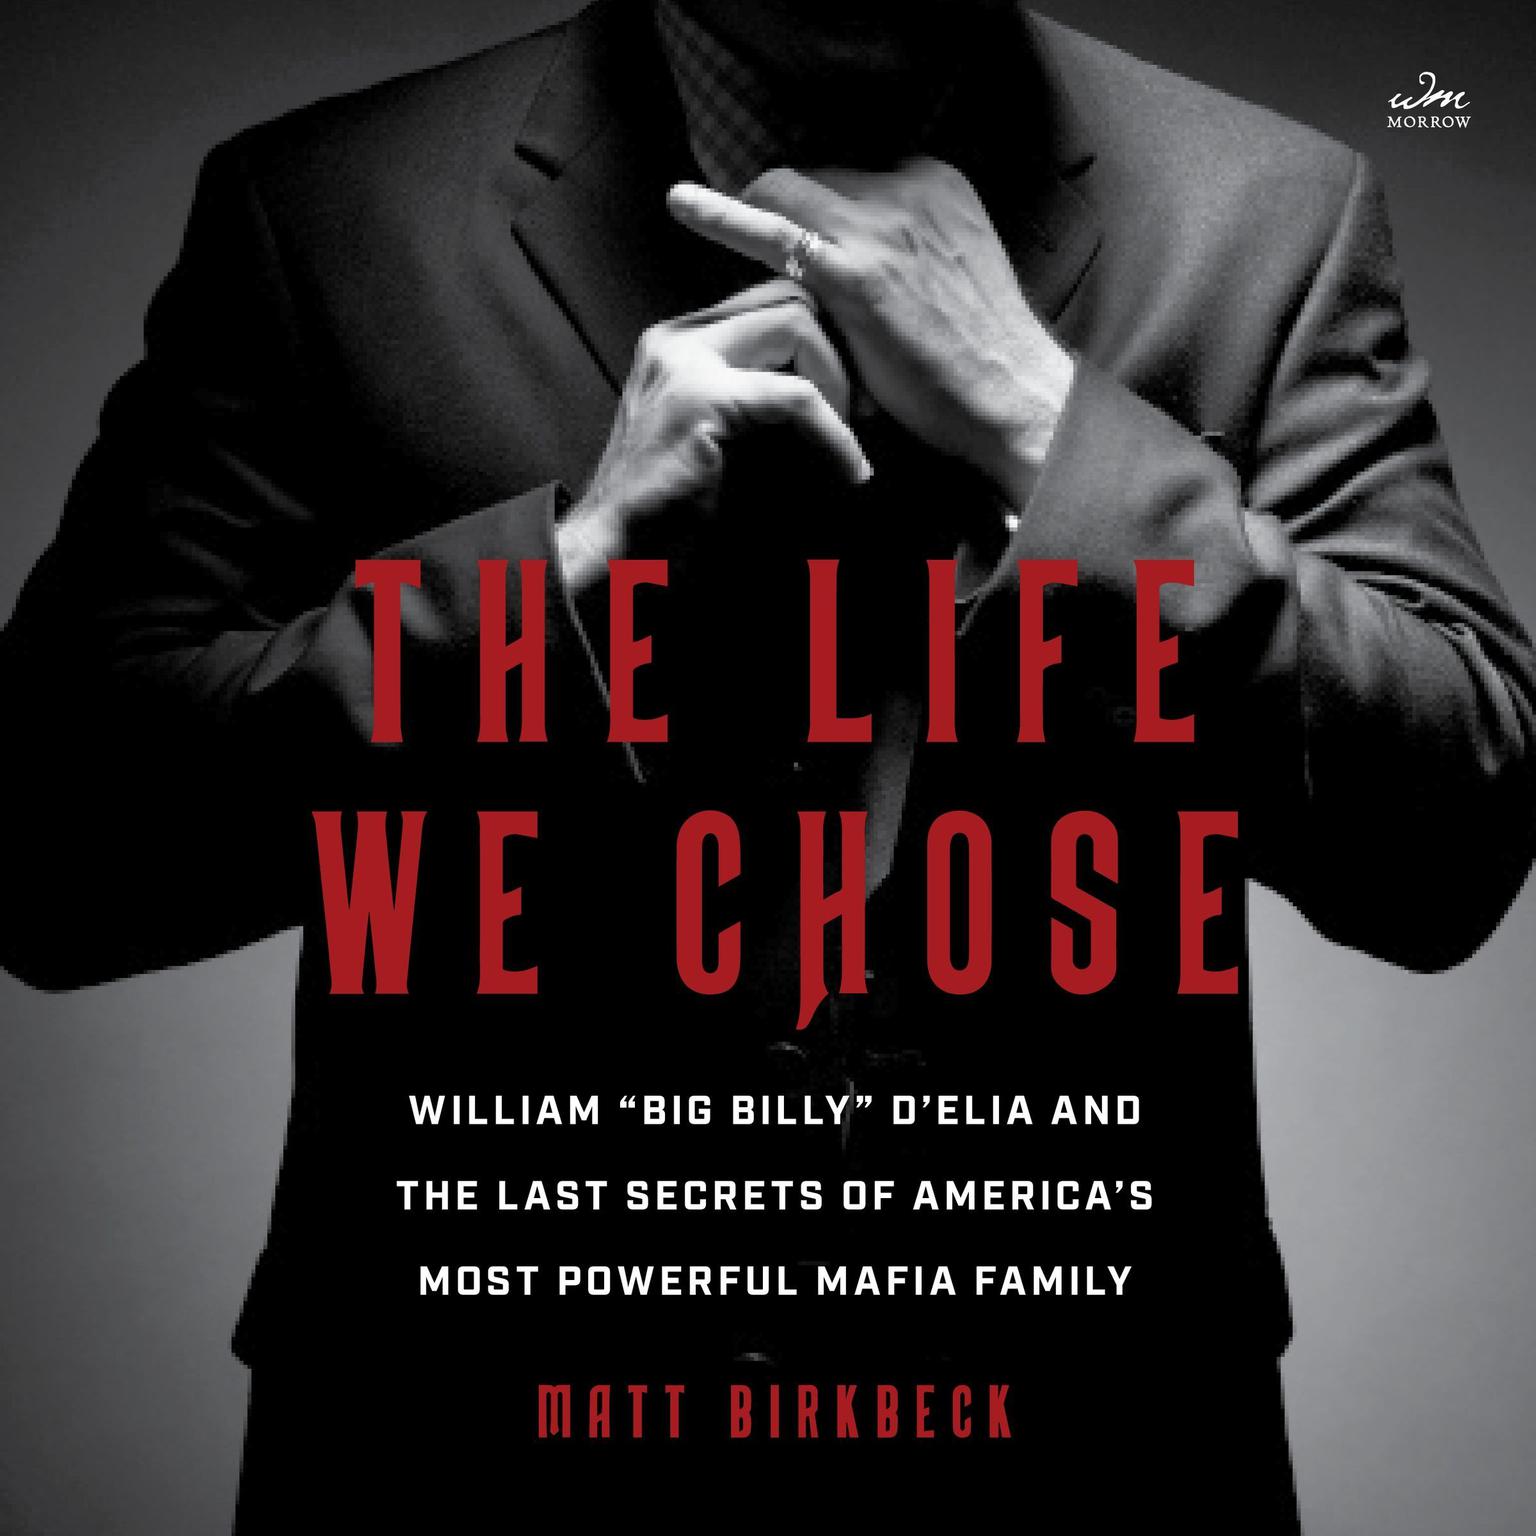 The Life We Chose: William “Big Billy” D’Elia and the Last Secrets of America’s Most Powerful Mafia Family Audiobook, by Matt Birkbeck